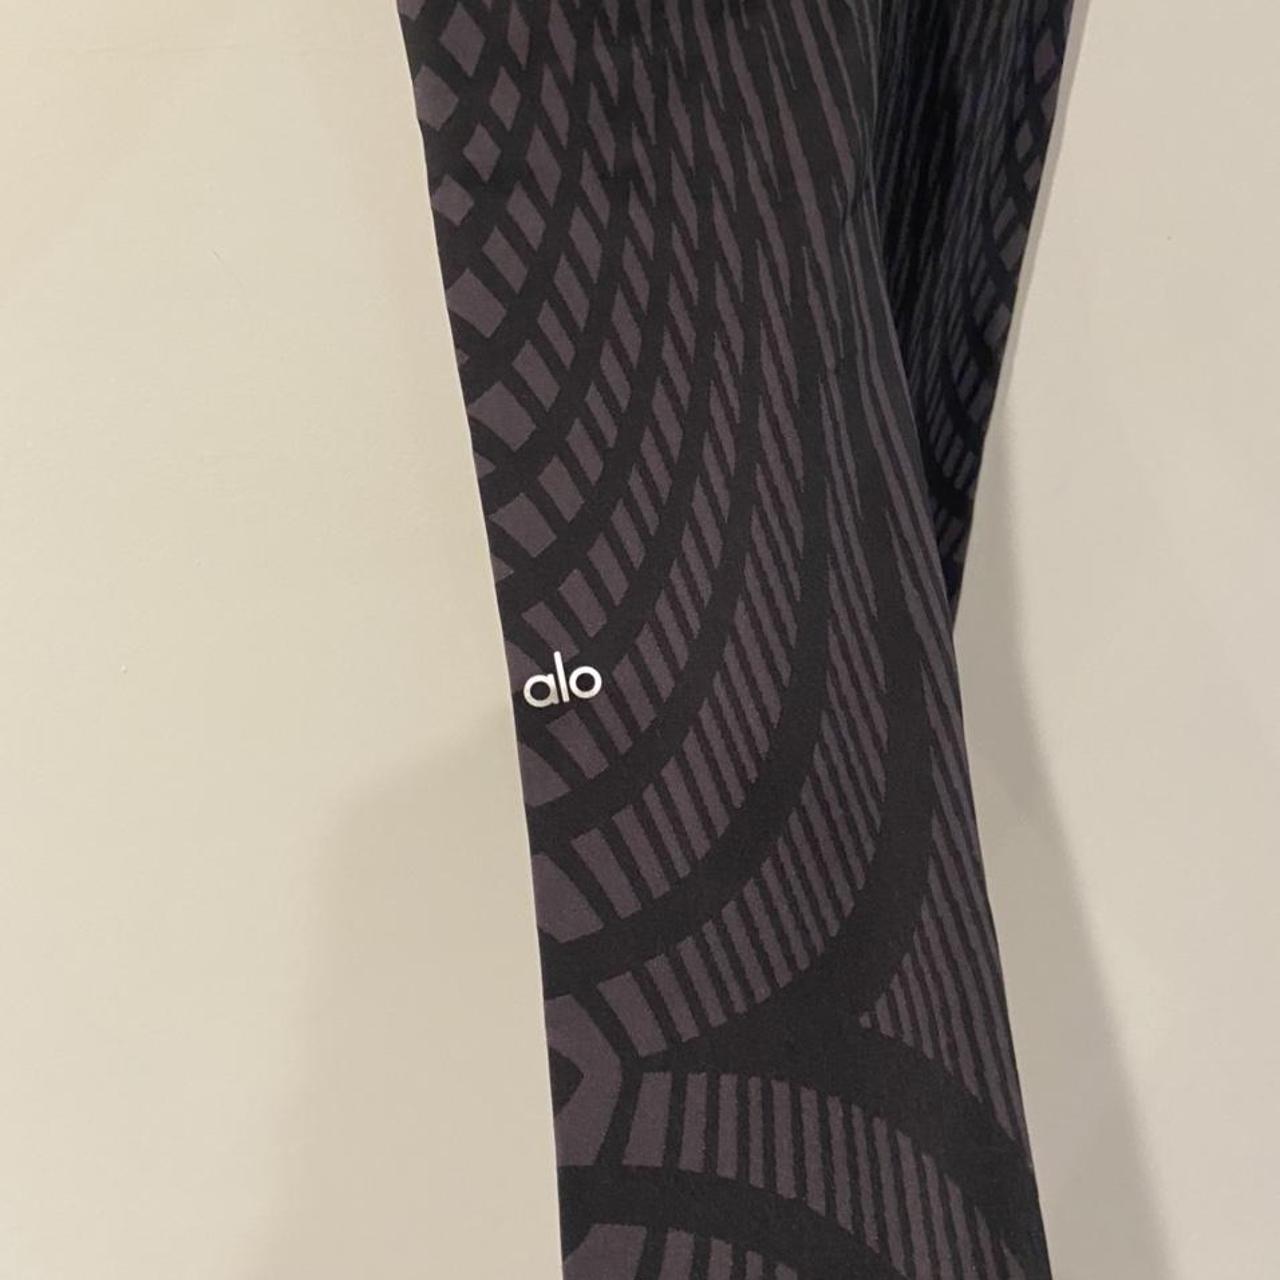 Product Image 3 - Alo Yoga Leggings
Size small
Great preowned